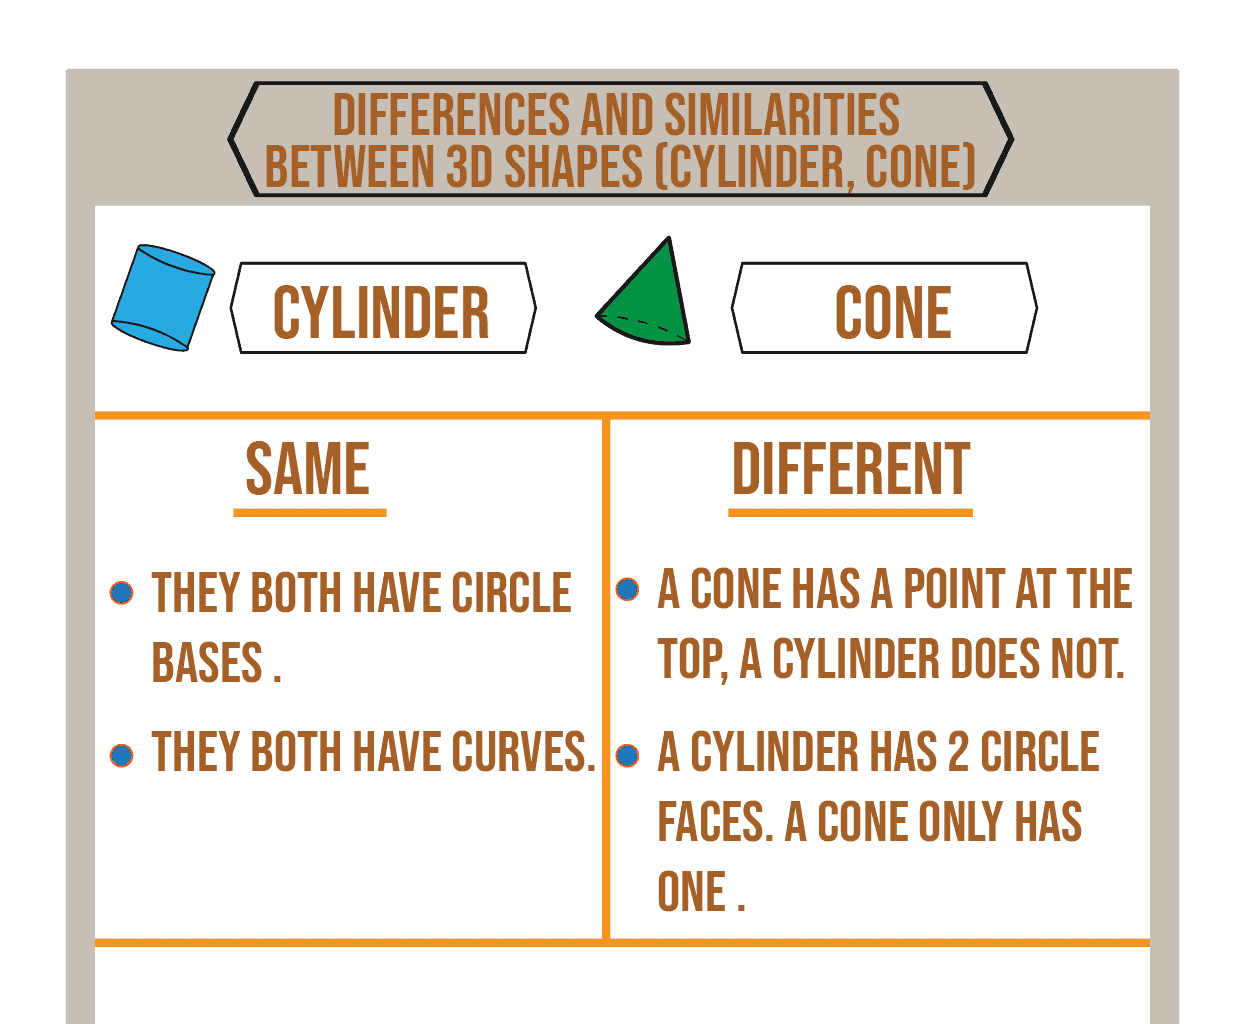 Differences and Similarities between 3D Shapes of cone and cylinder